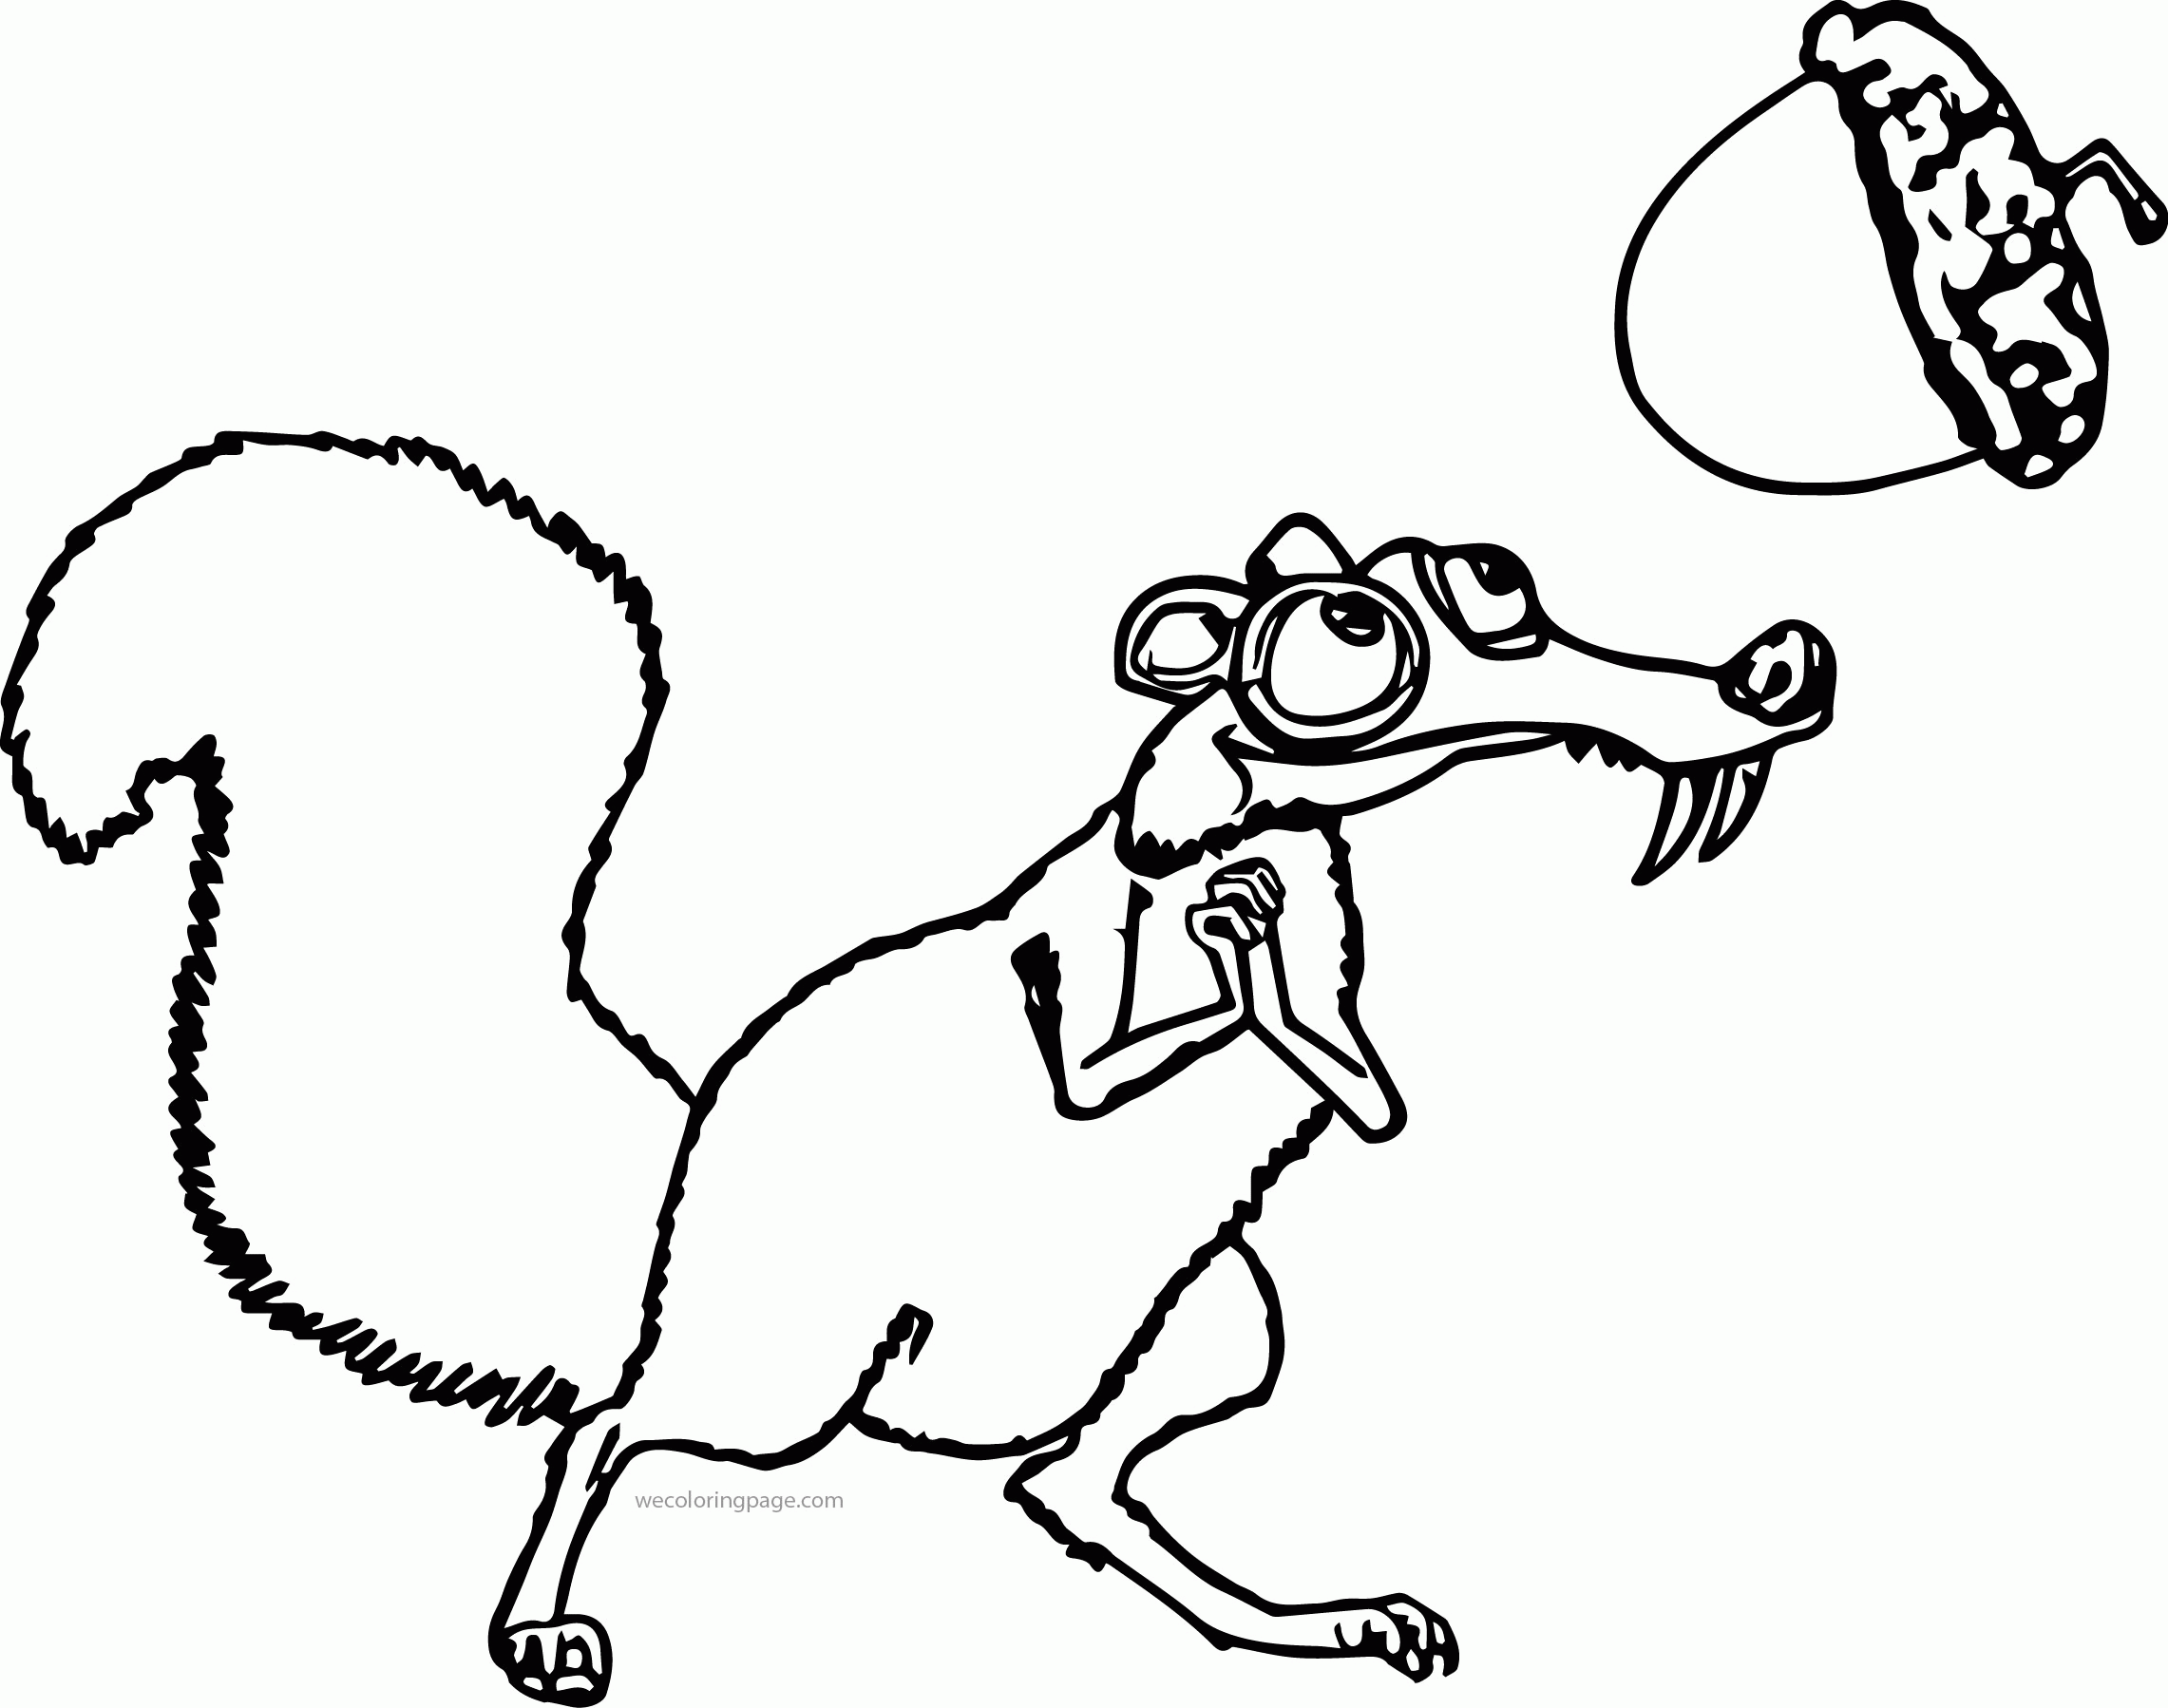 Scrat_from_the_movie_ice_age_4 Coloring Page Wecoloringpage.